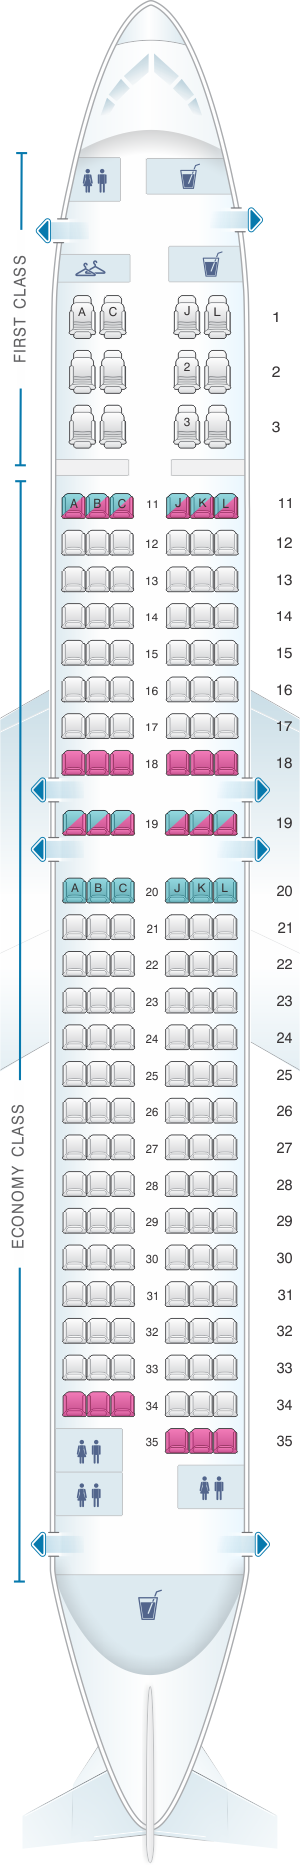 Seat map for Air China Boeing B737 800 (159PAX)